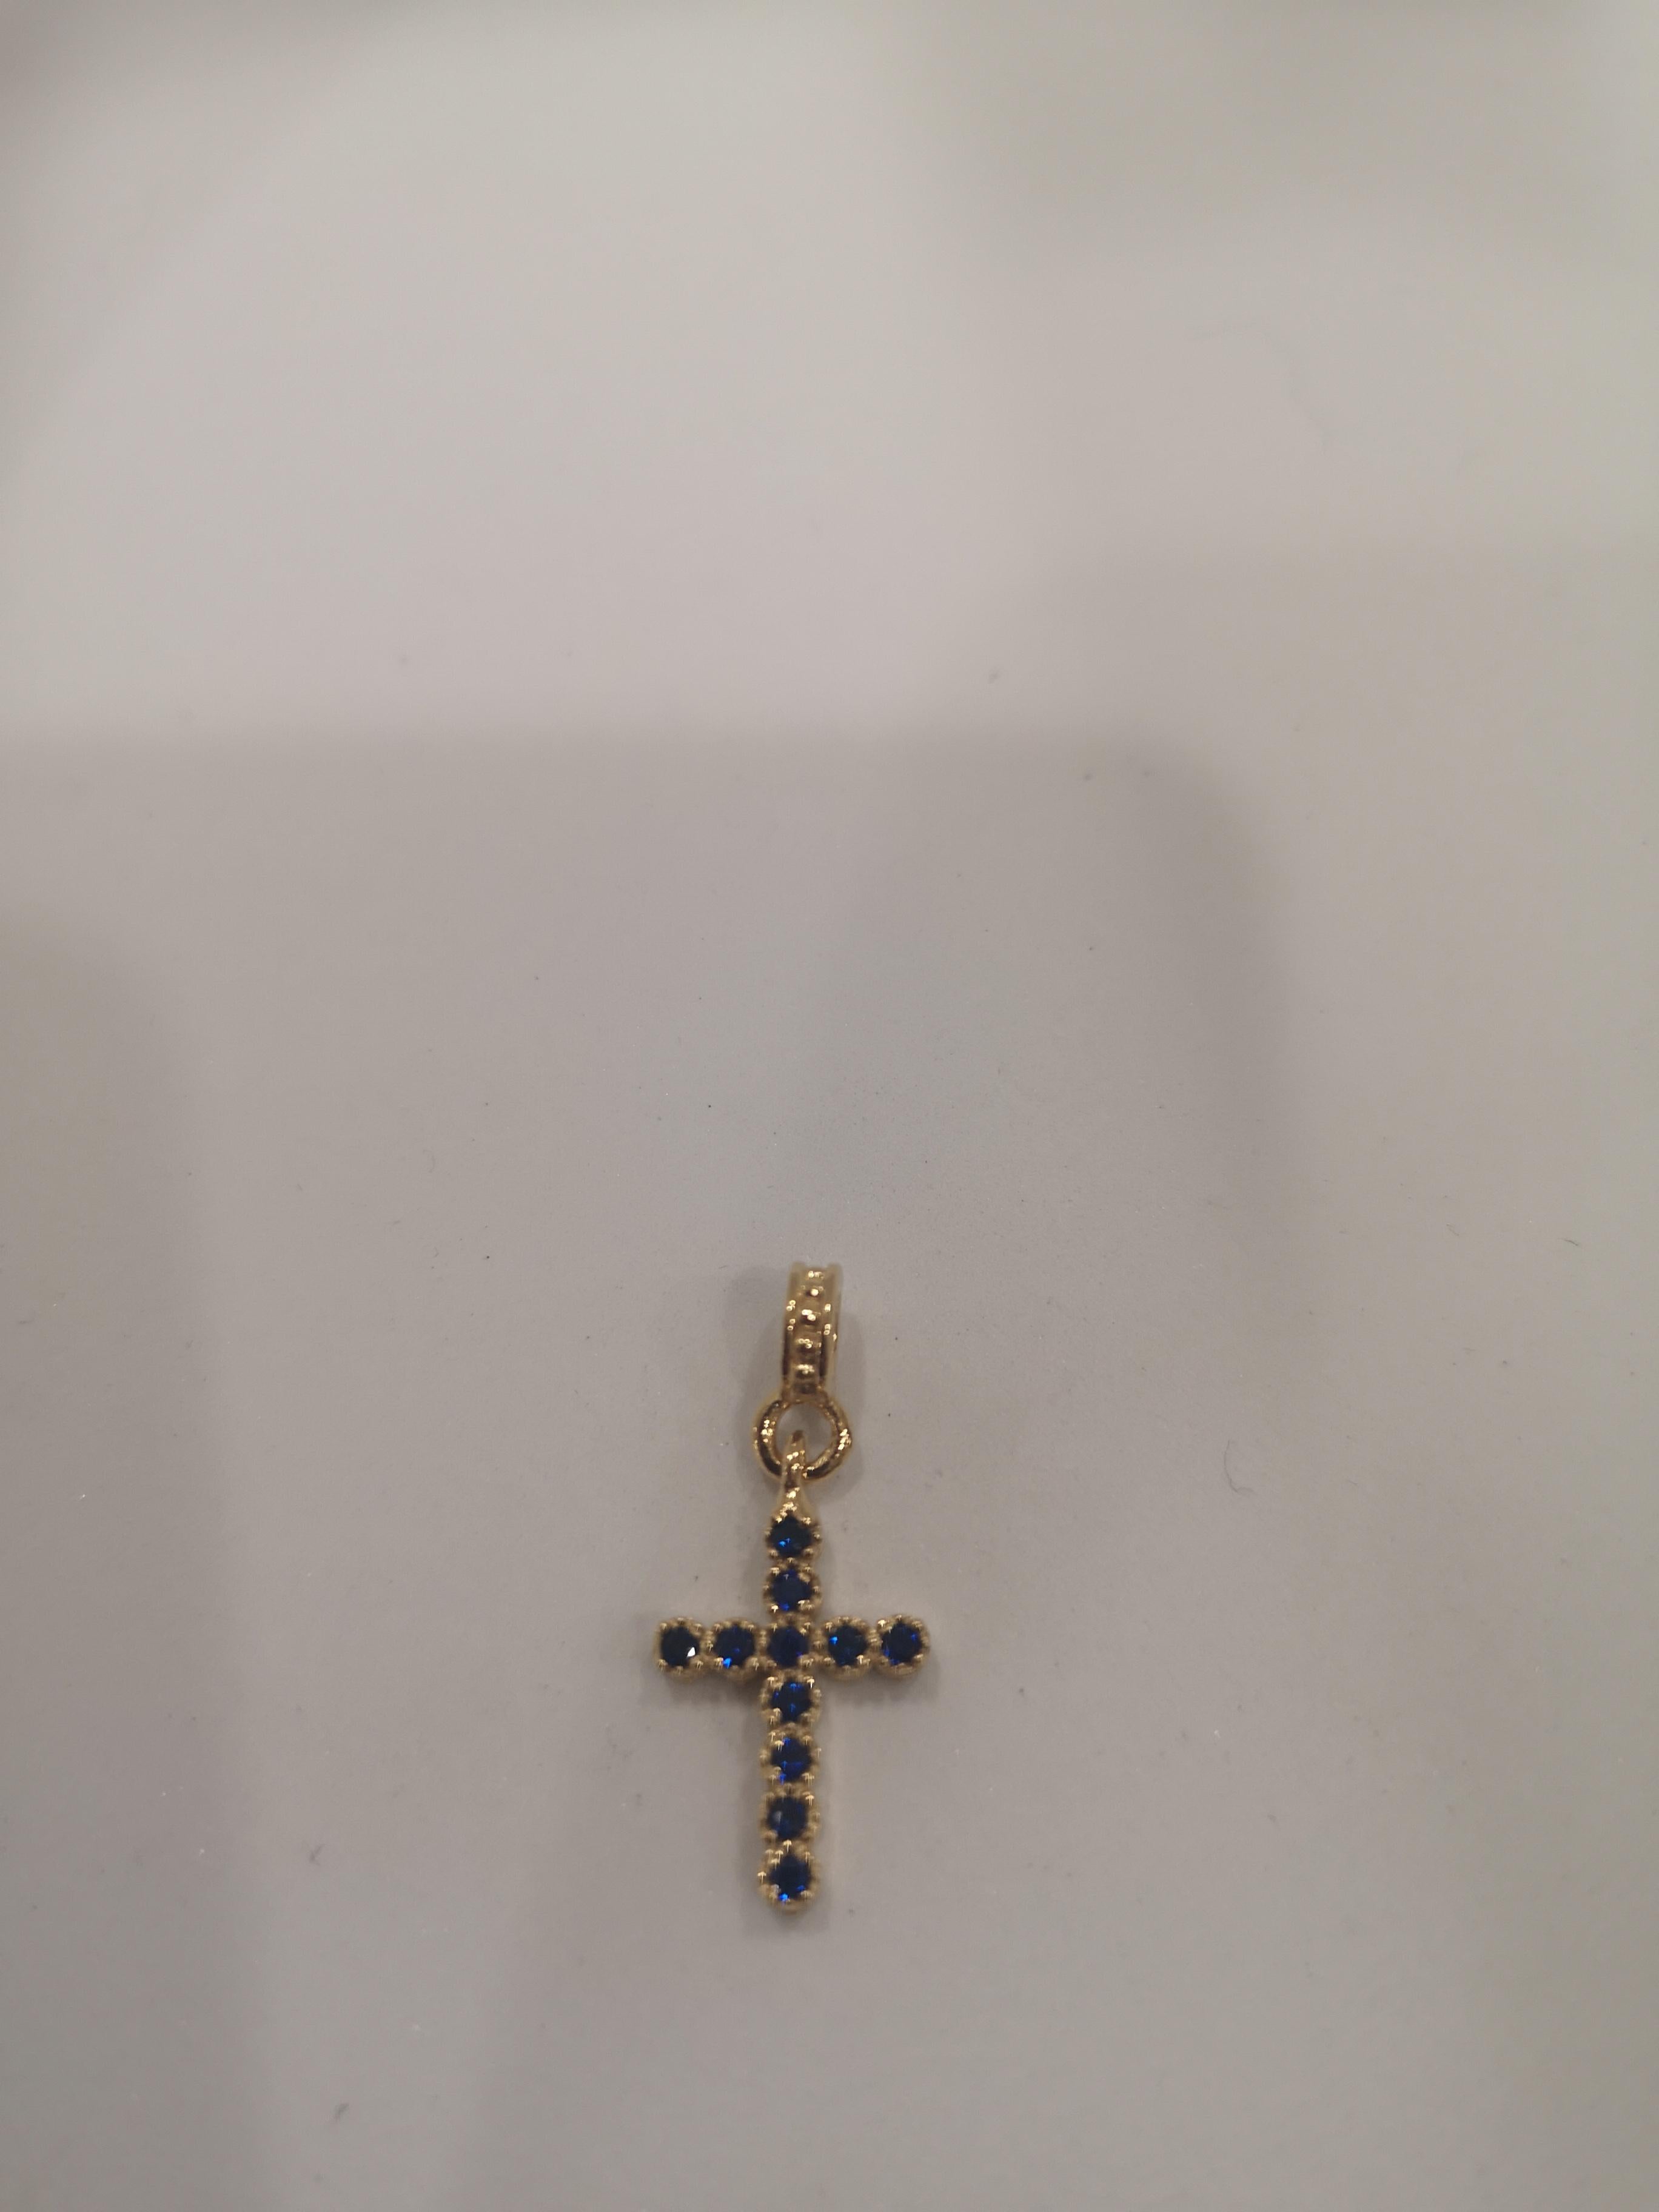 Gold plated cross zirconia charm
Totally handmade in Italy gold plated 925% silver
Charm can be add on a necklace or on a bracelet